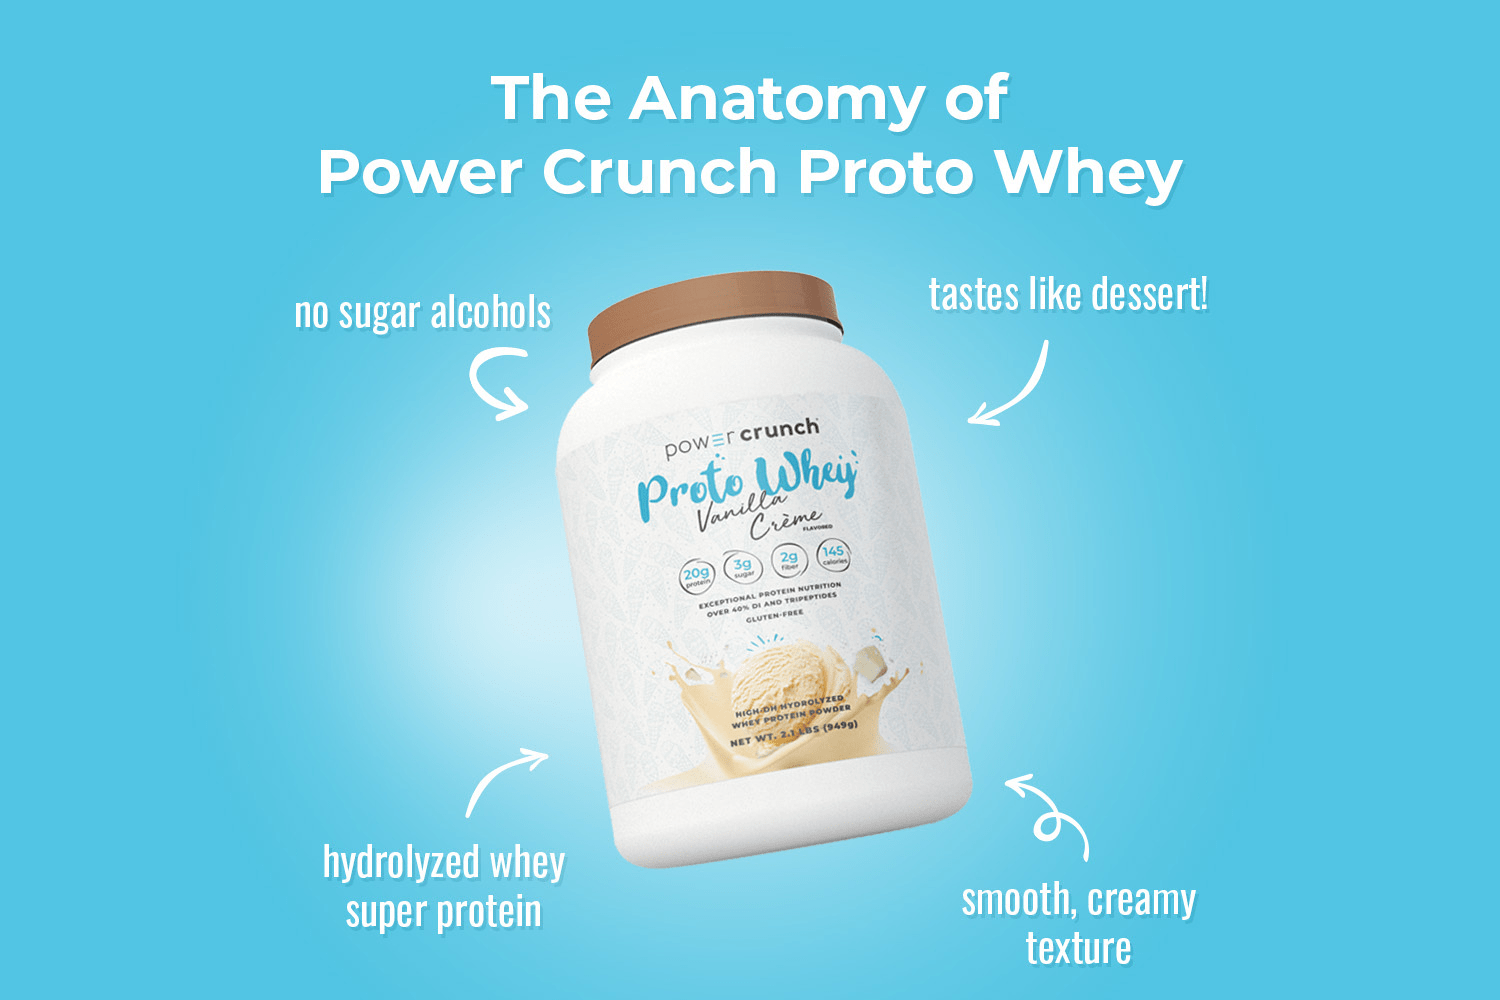 vanilla protein powder with hydrolyzed whey protein, no sugar alcohols, and smooth creamy texture